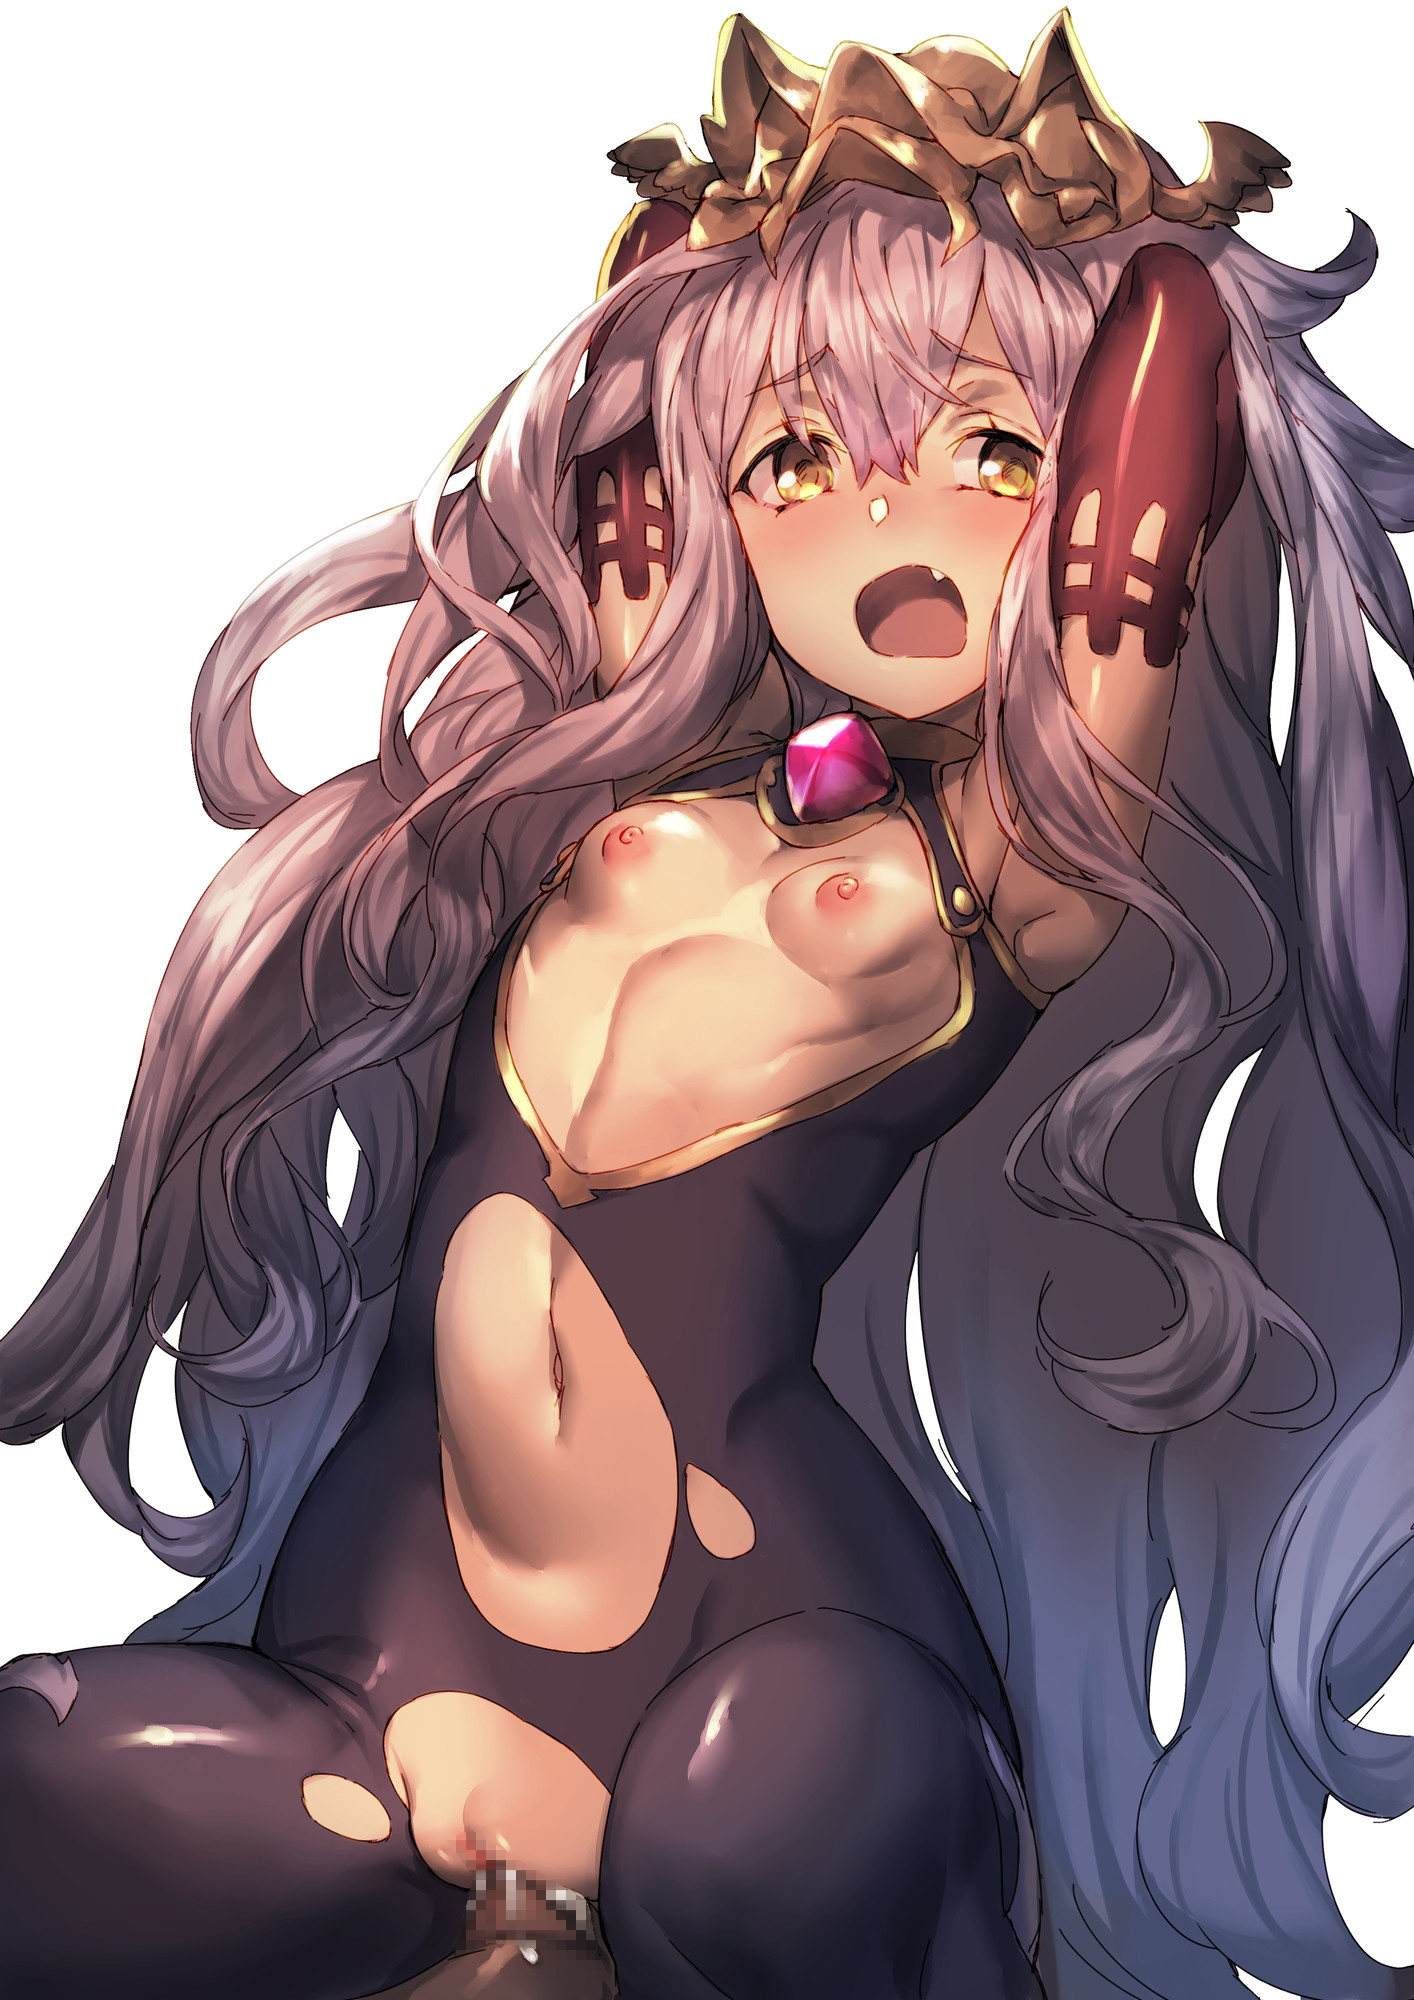 [Gran Blue Fantasy] you want to see a naughty image of Medusa? 13